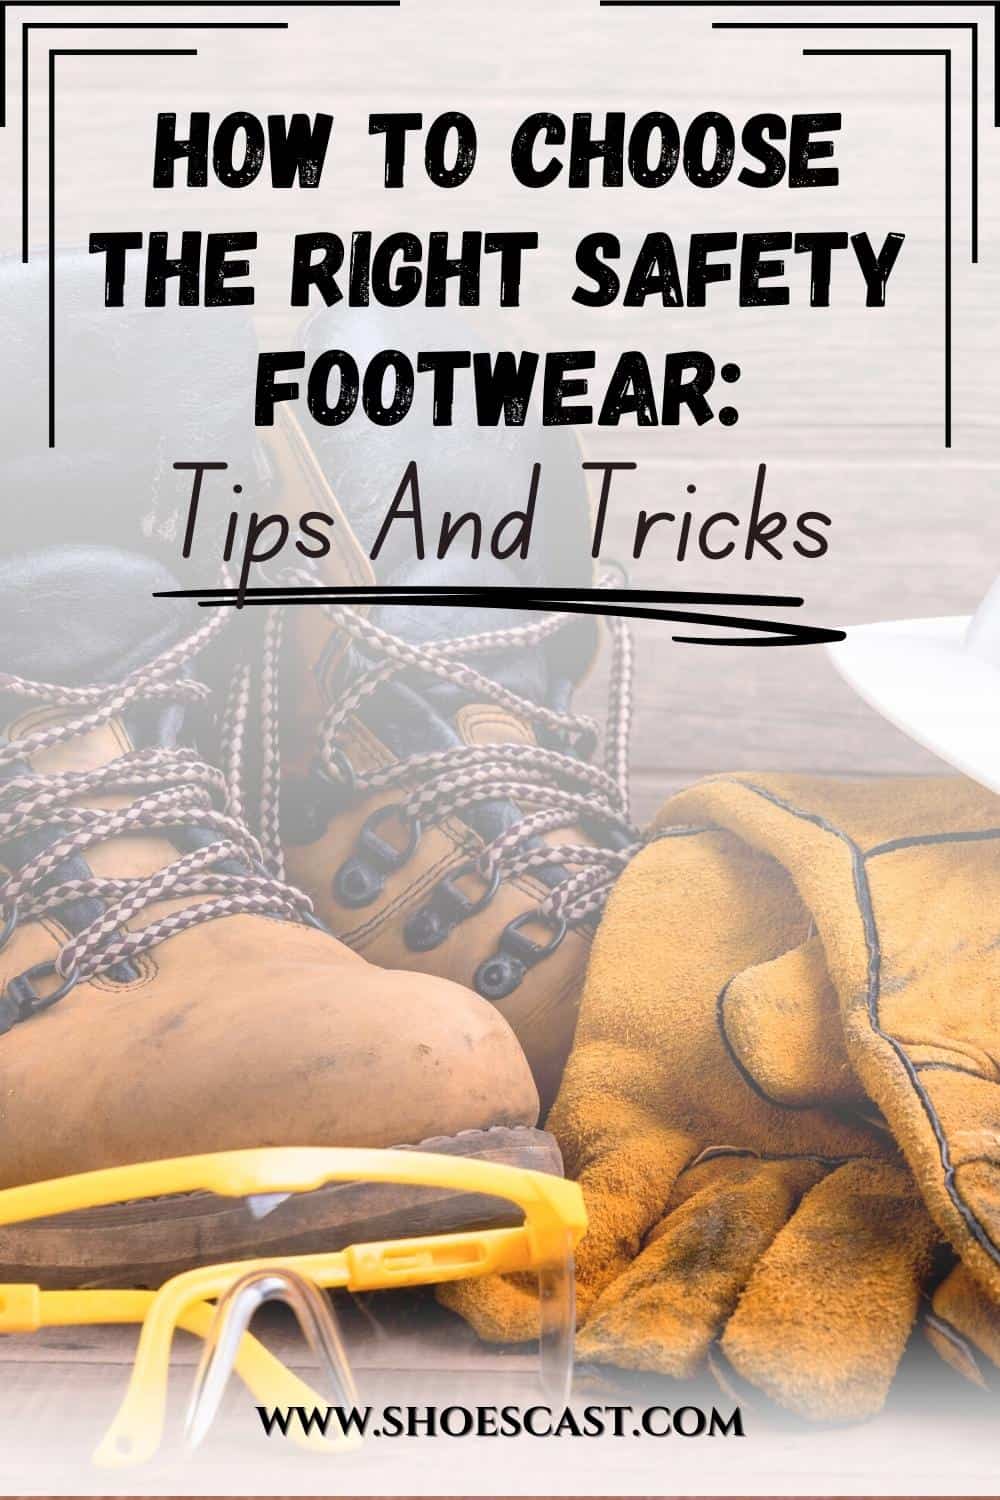 How To Choose The Right Safety Footwear: Tips And Tricks